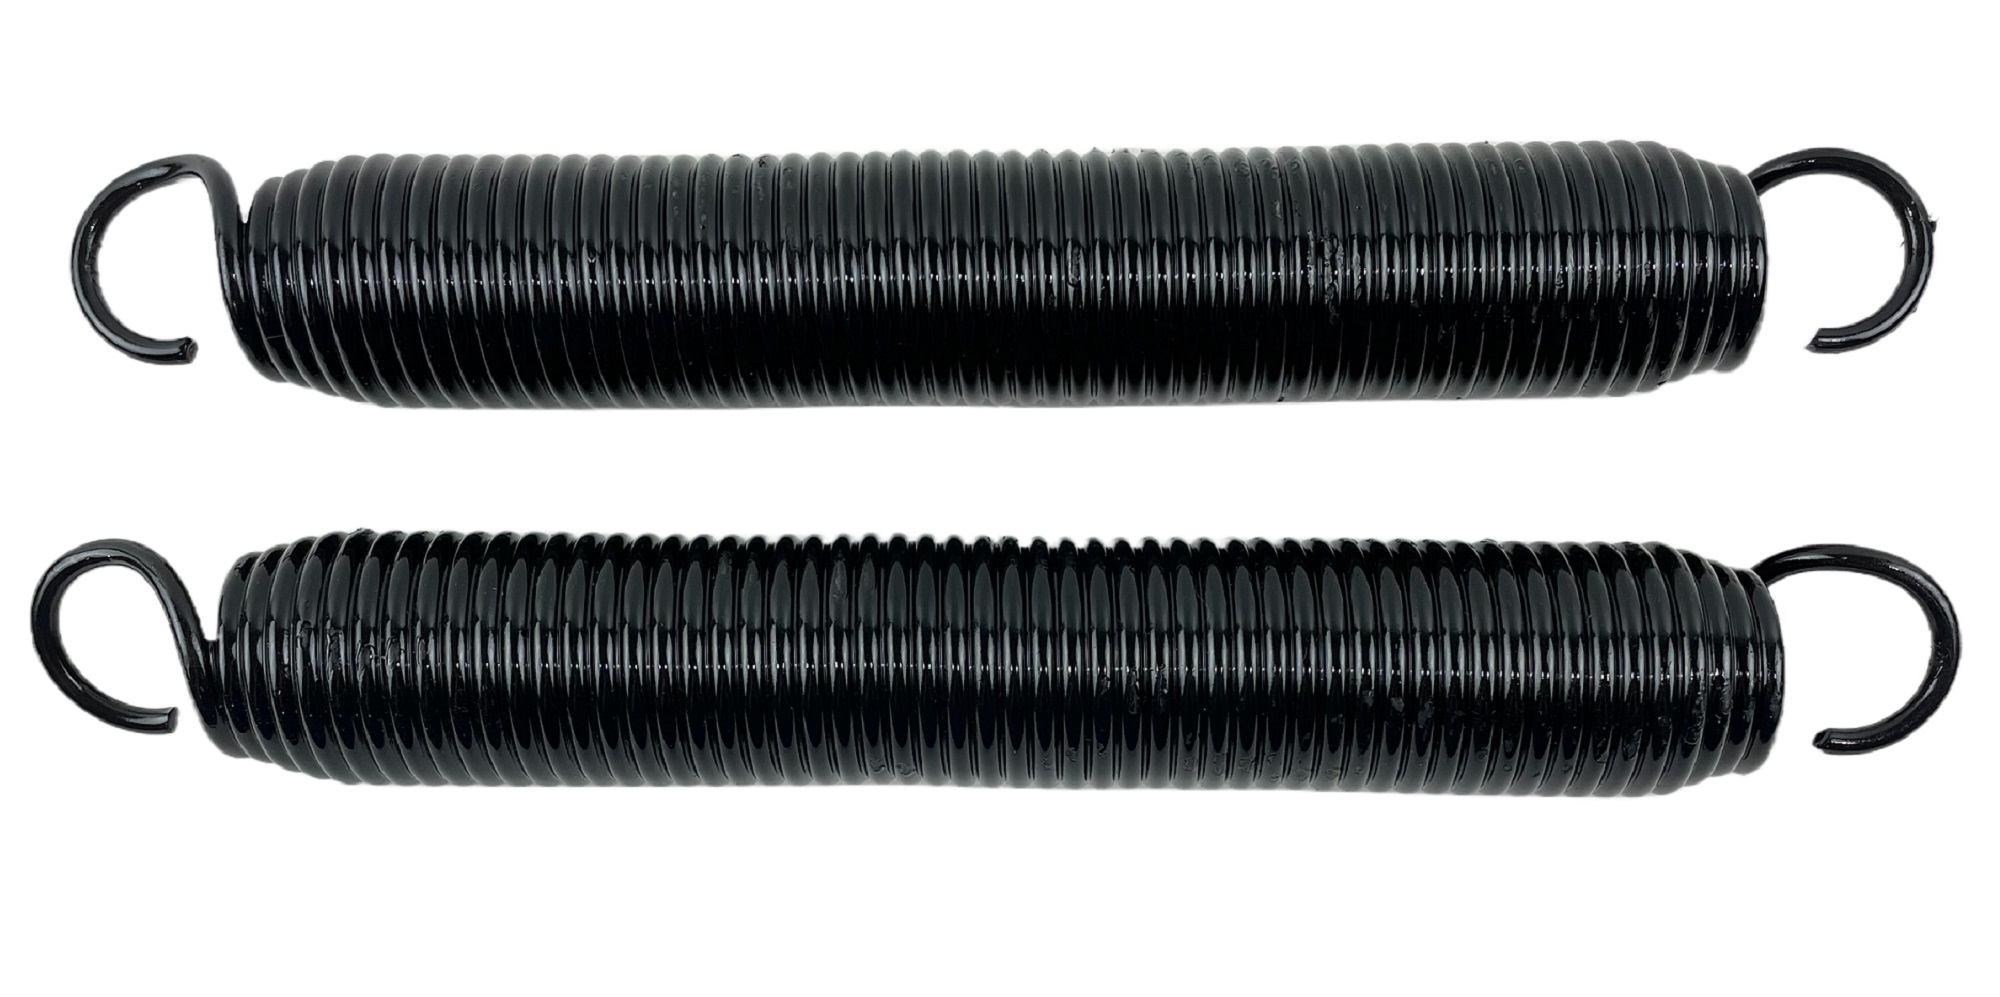 HWH R34692 Replacement Spring Kit for Hydraulic Leveling Jacks